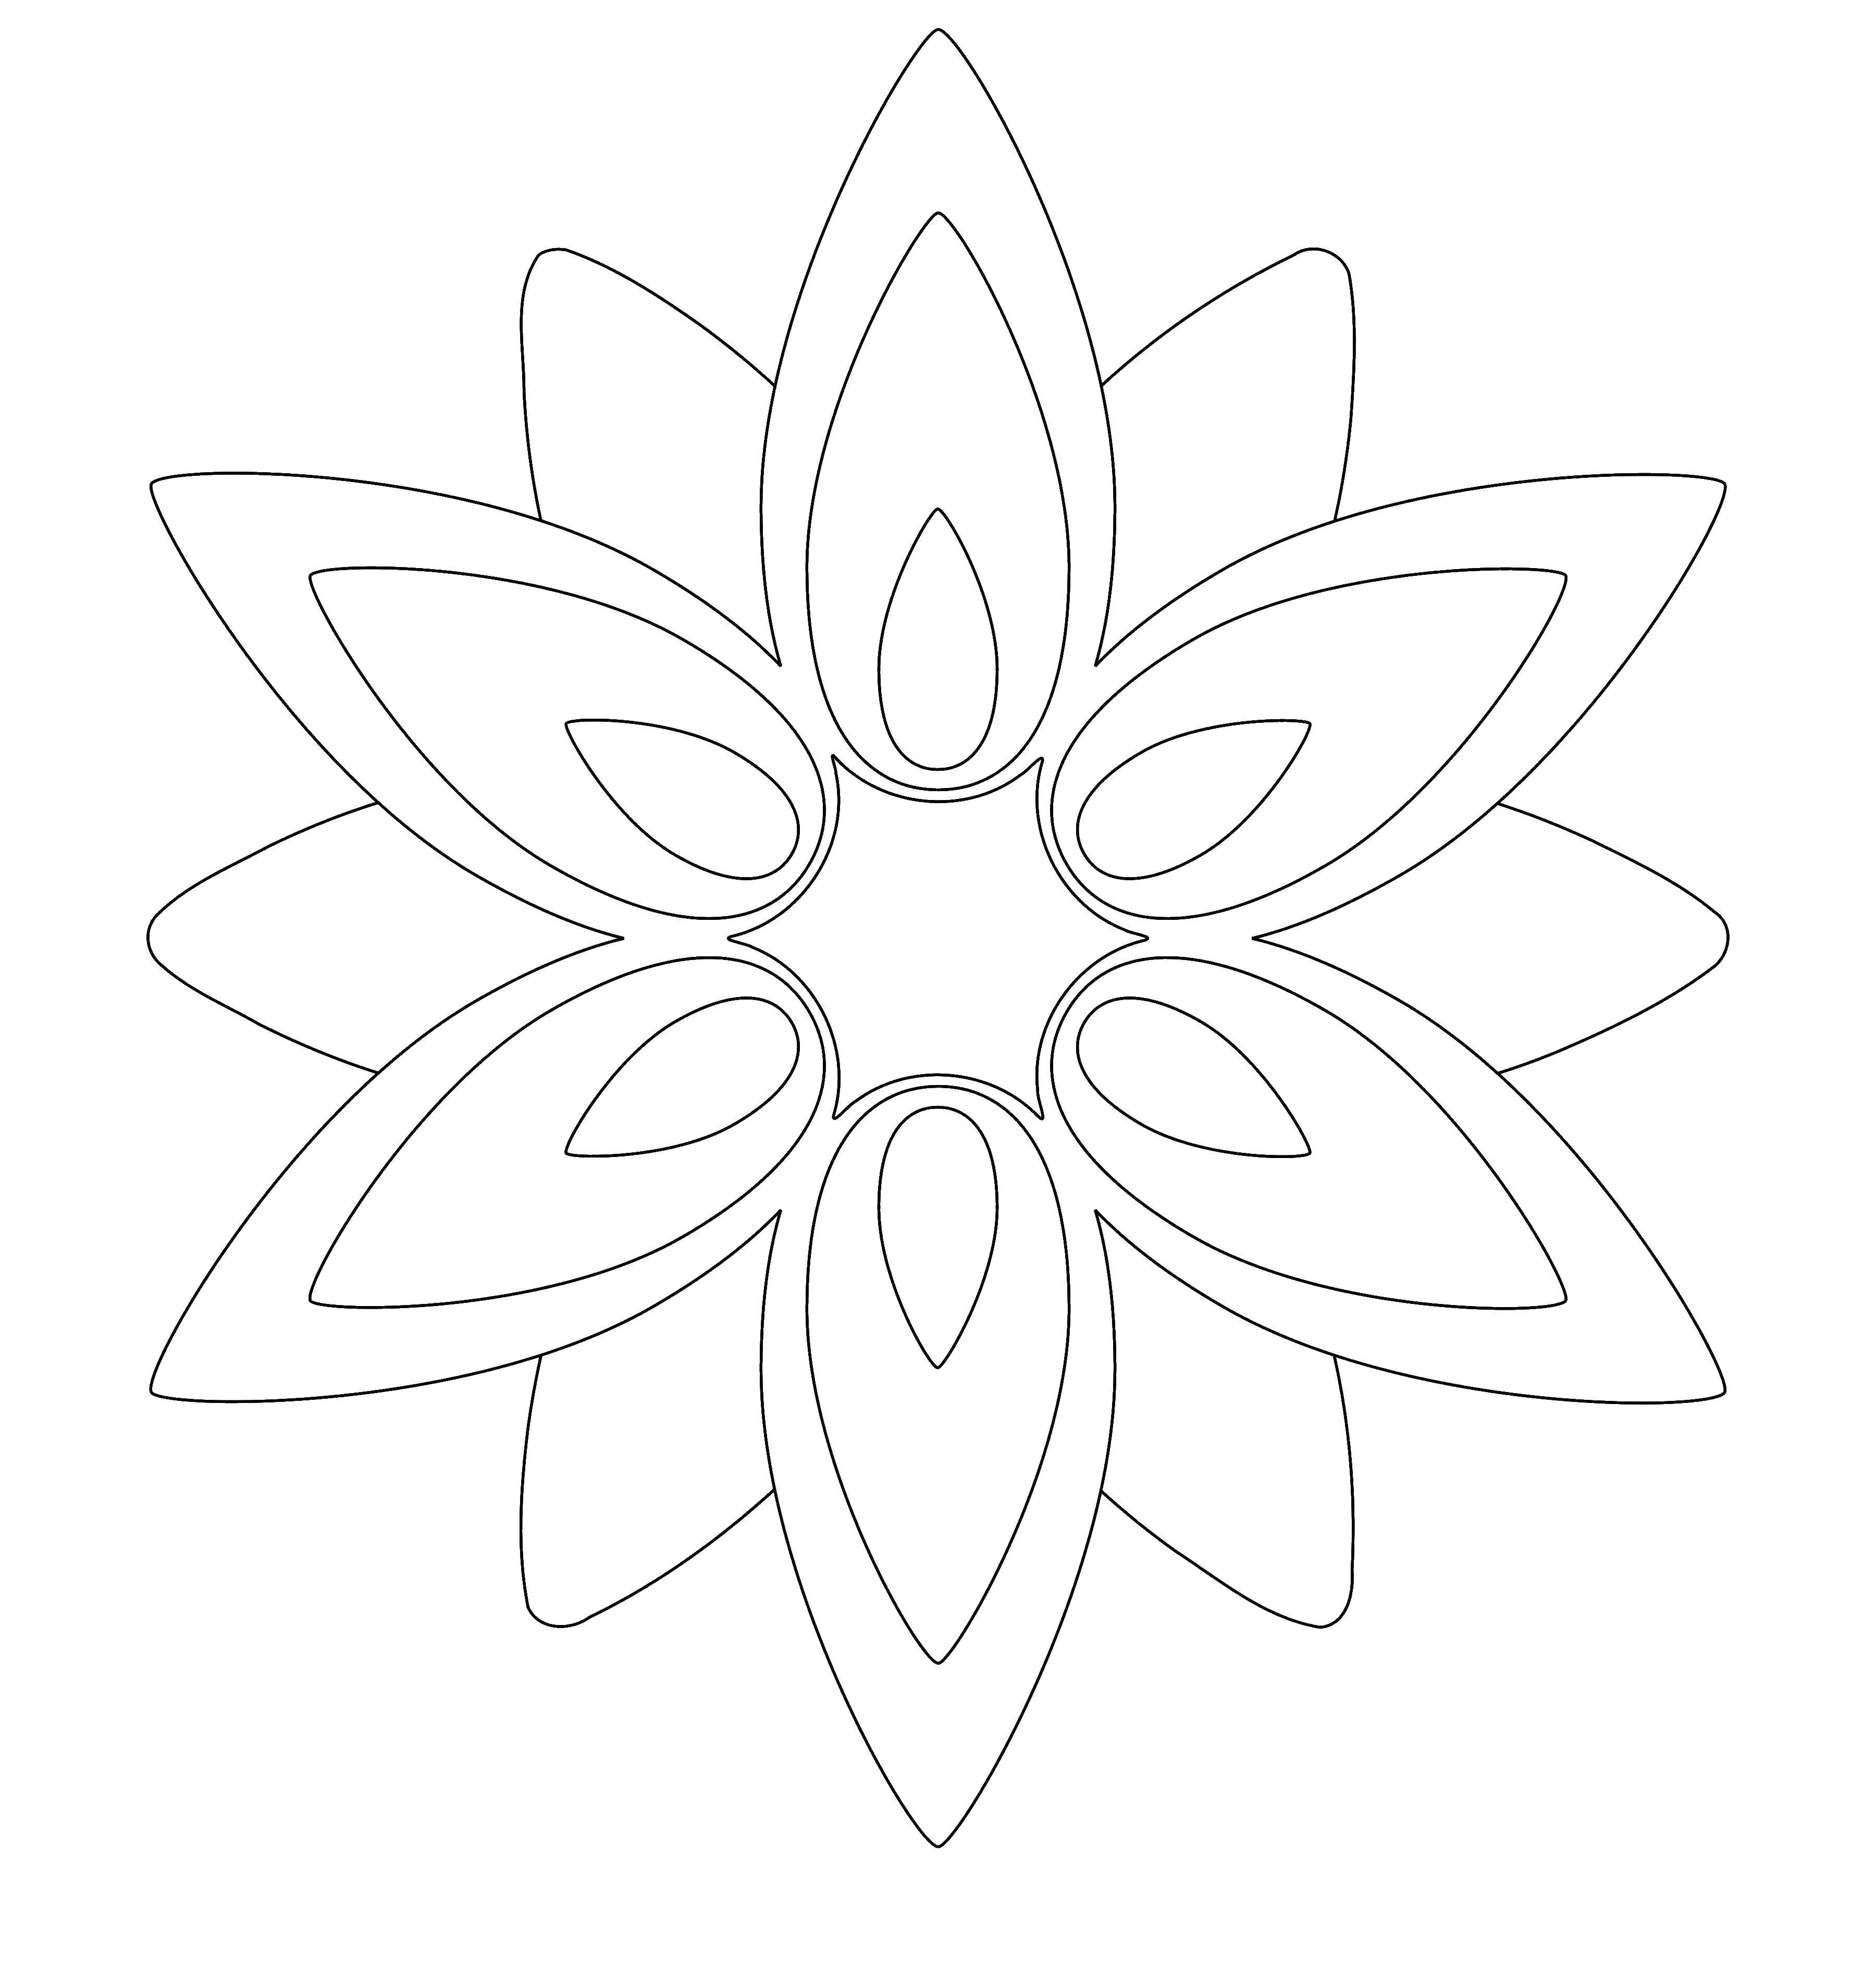 Coloring Patterned flowers. Category patterns. Tags:  Patterns, flower.